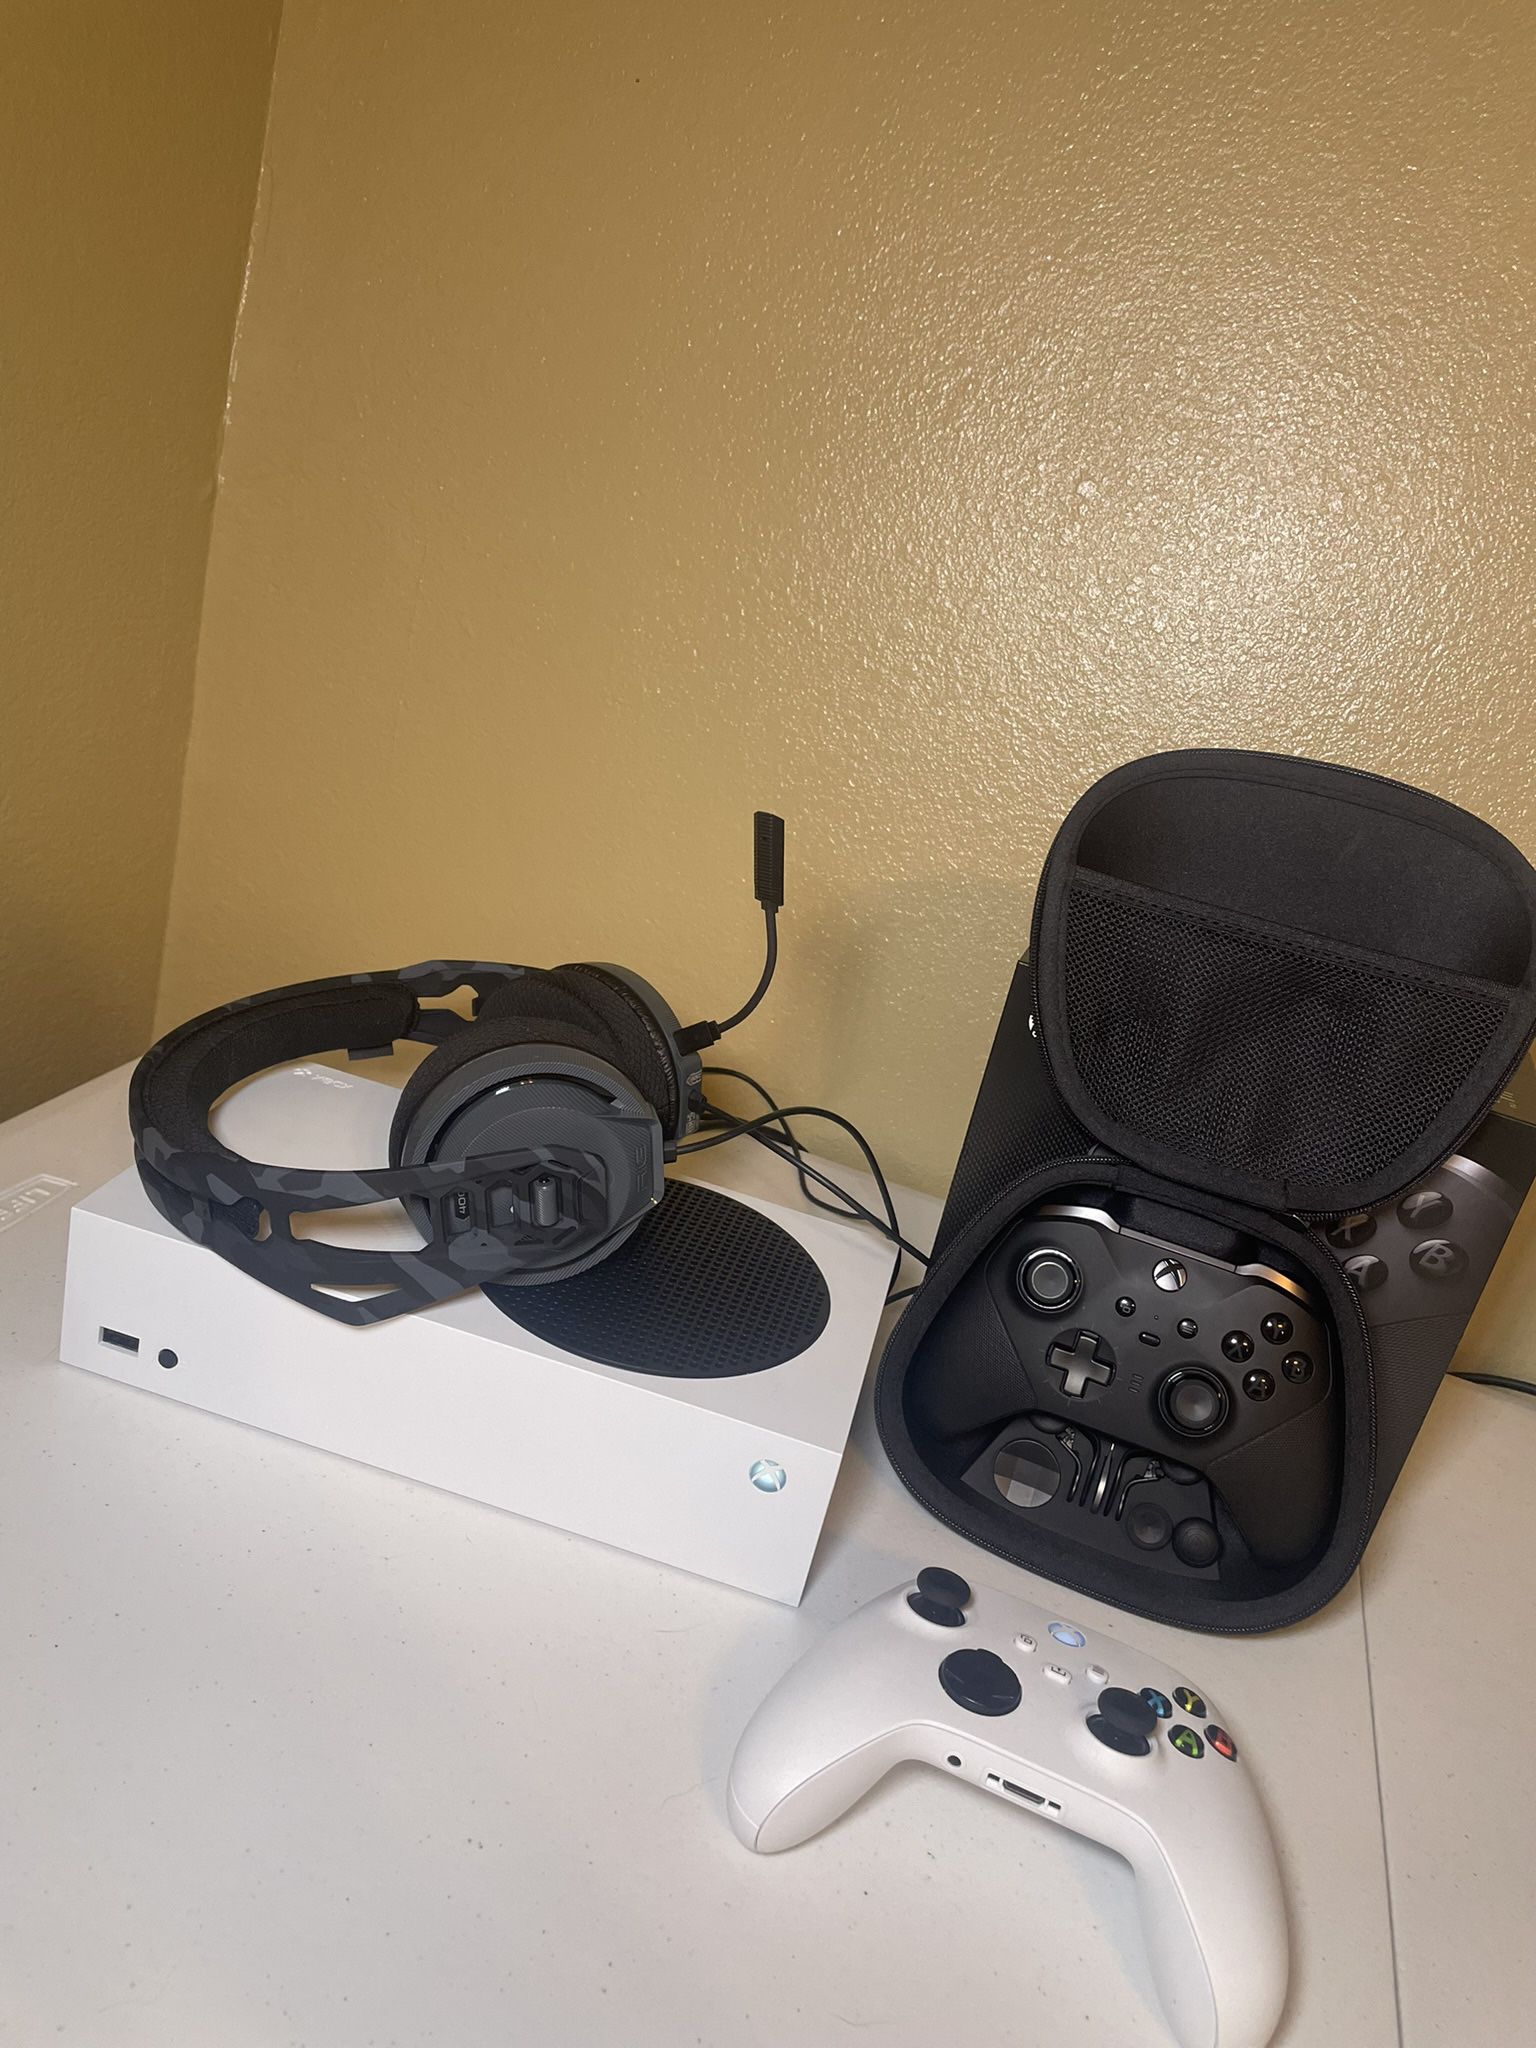 Xbox Series S With Xbox Elite Series 2 Controller And A Rig 400 Headset